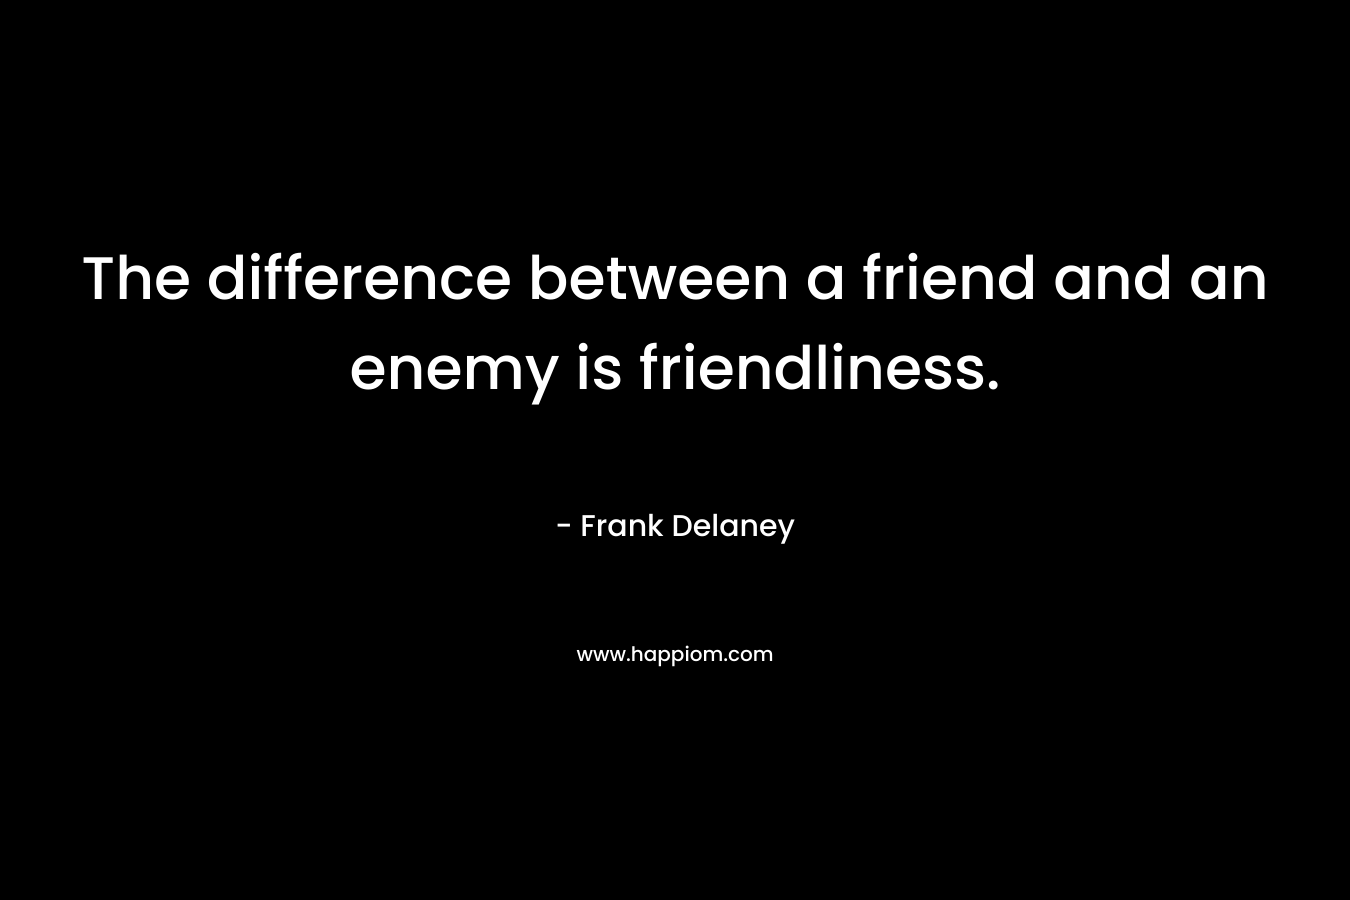 The difference between a friend and an enemy is friendliness. – Frank Delaney